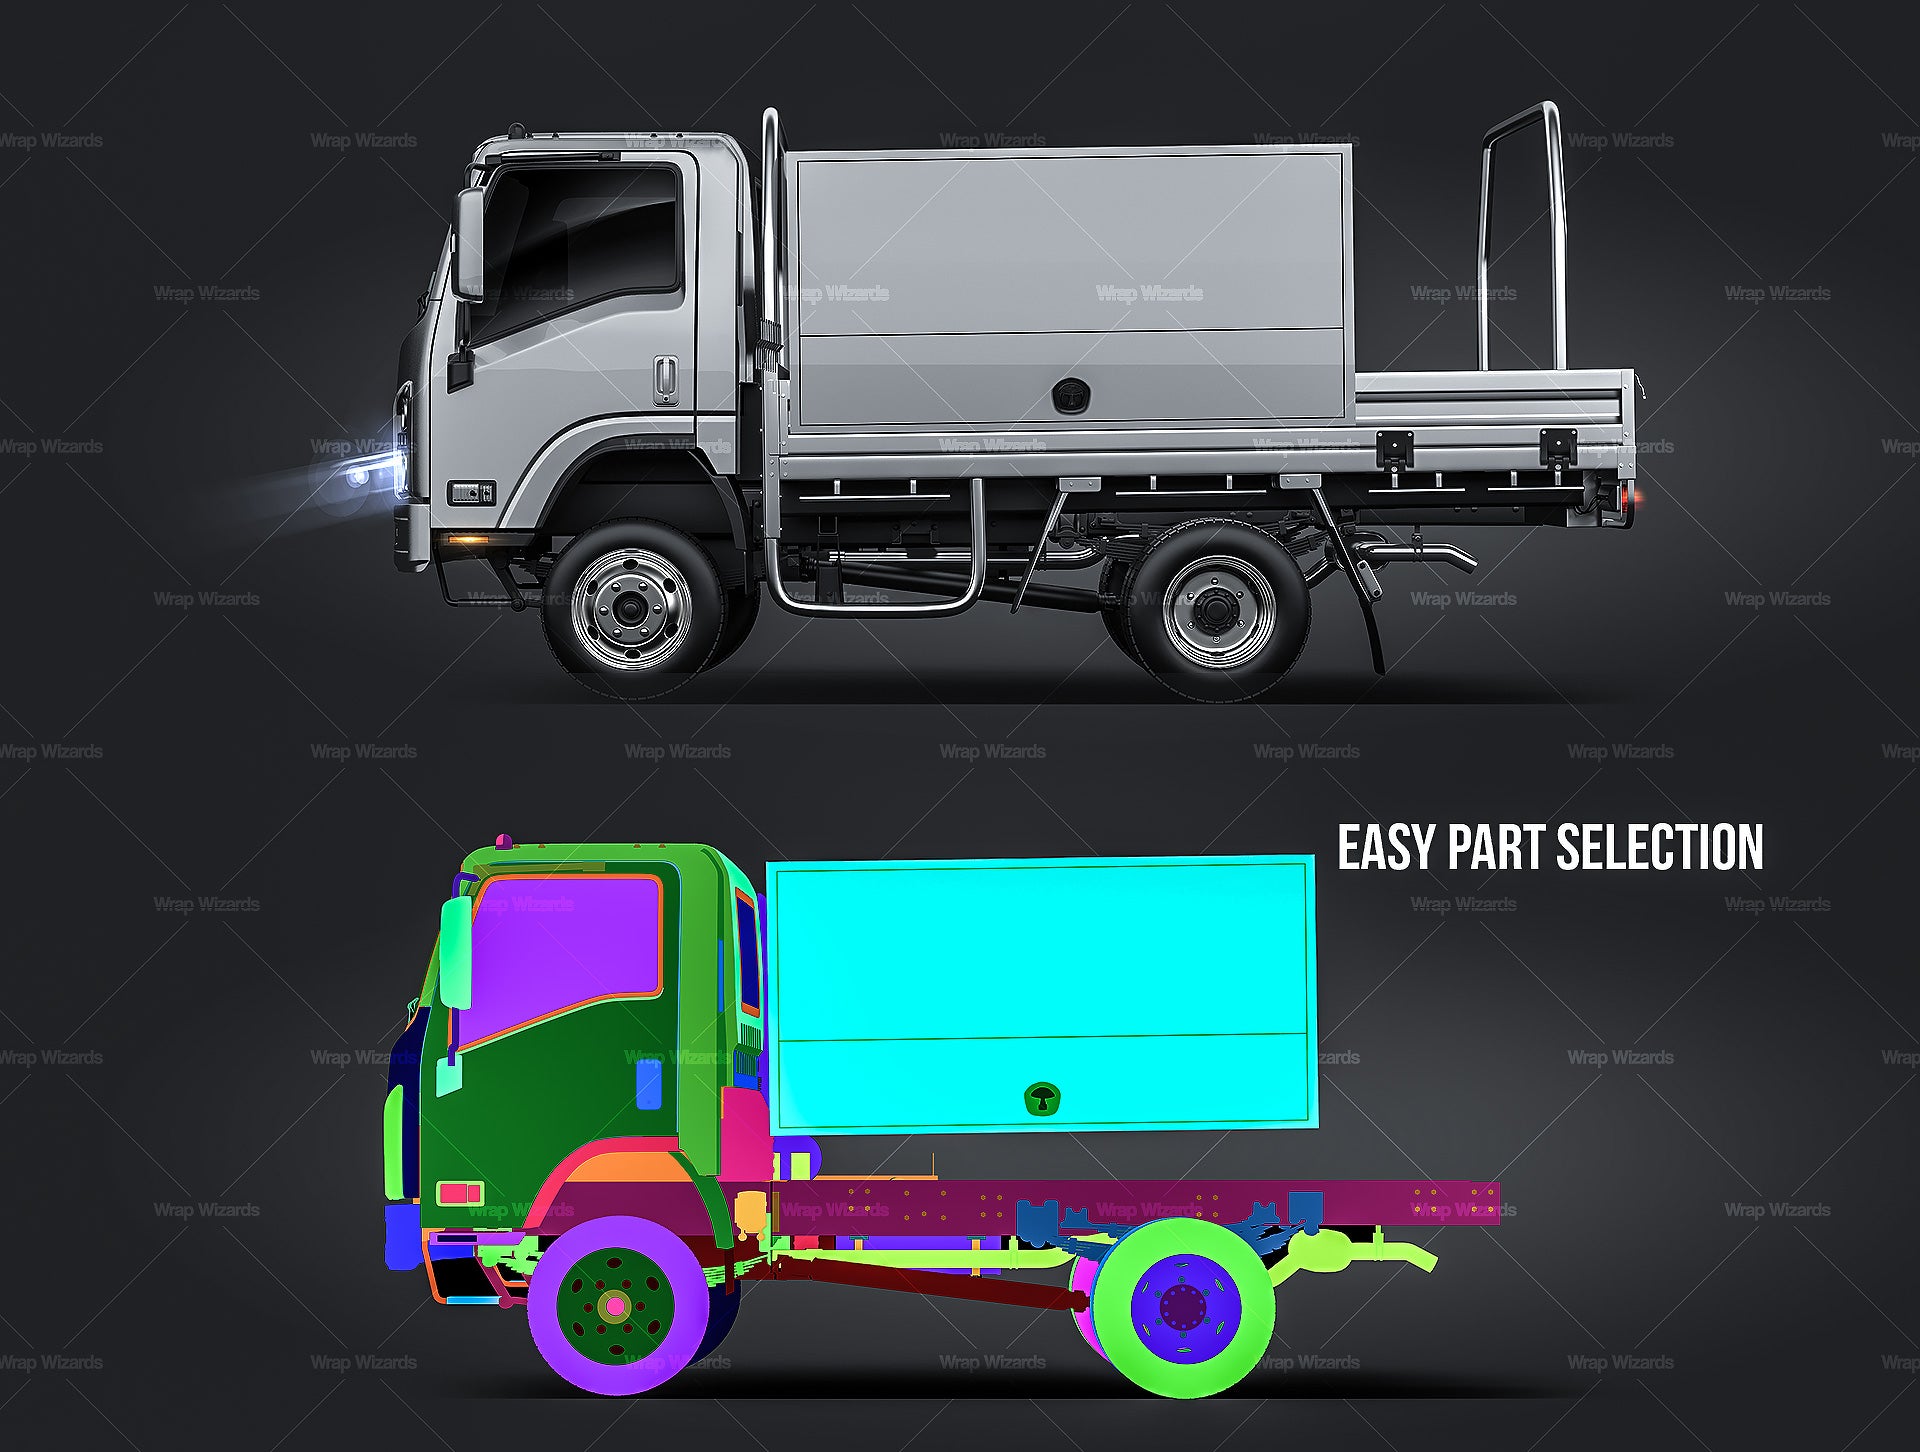 Isuzu NPS 300 truck with alloy tray and toolboxes glossy finish - all sides Car Mockup Template.psd